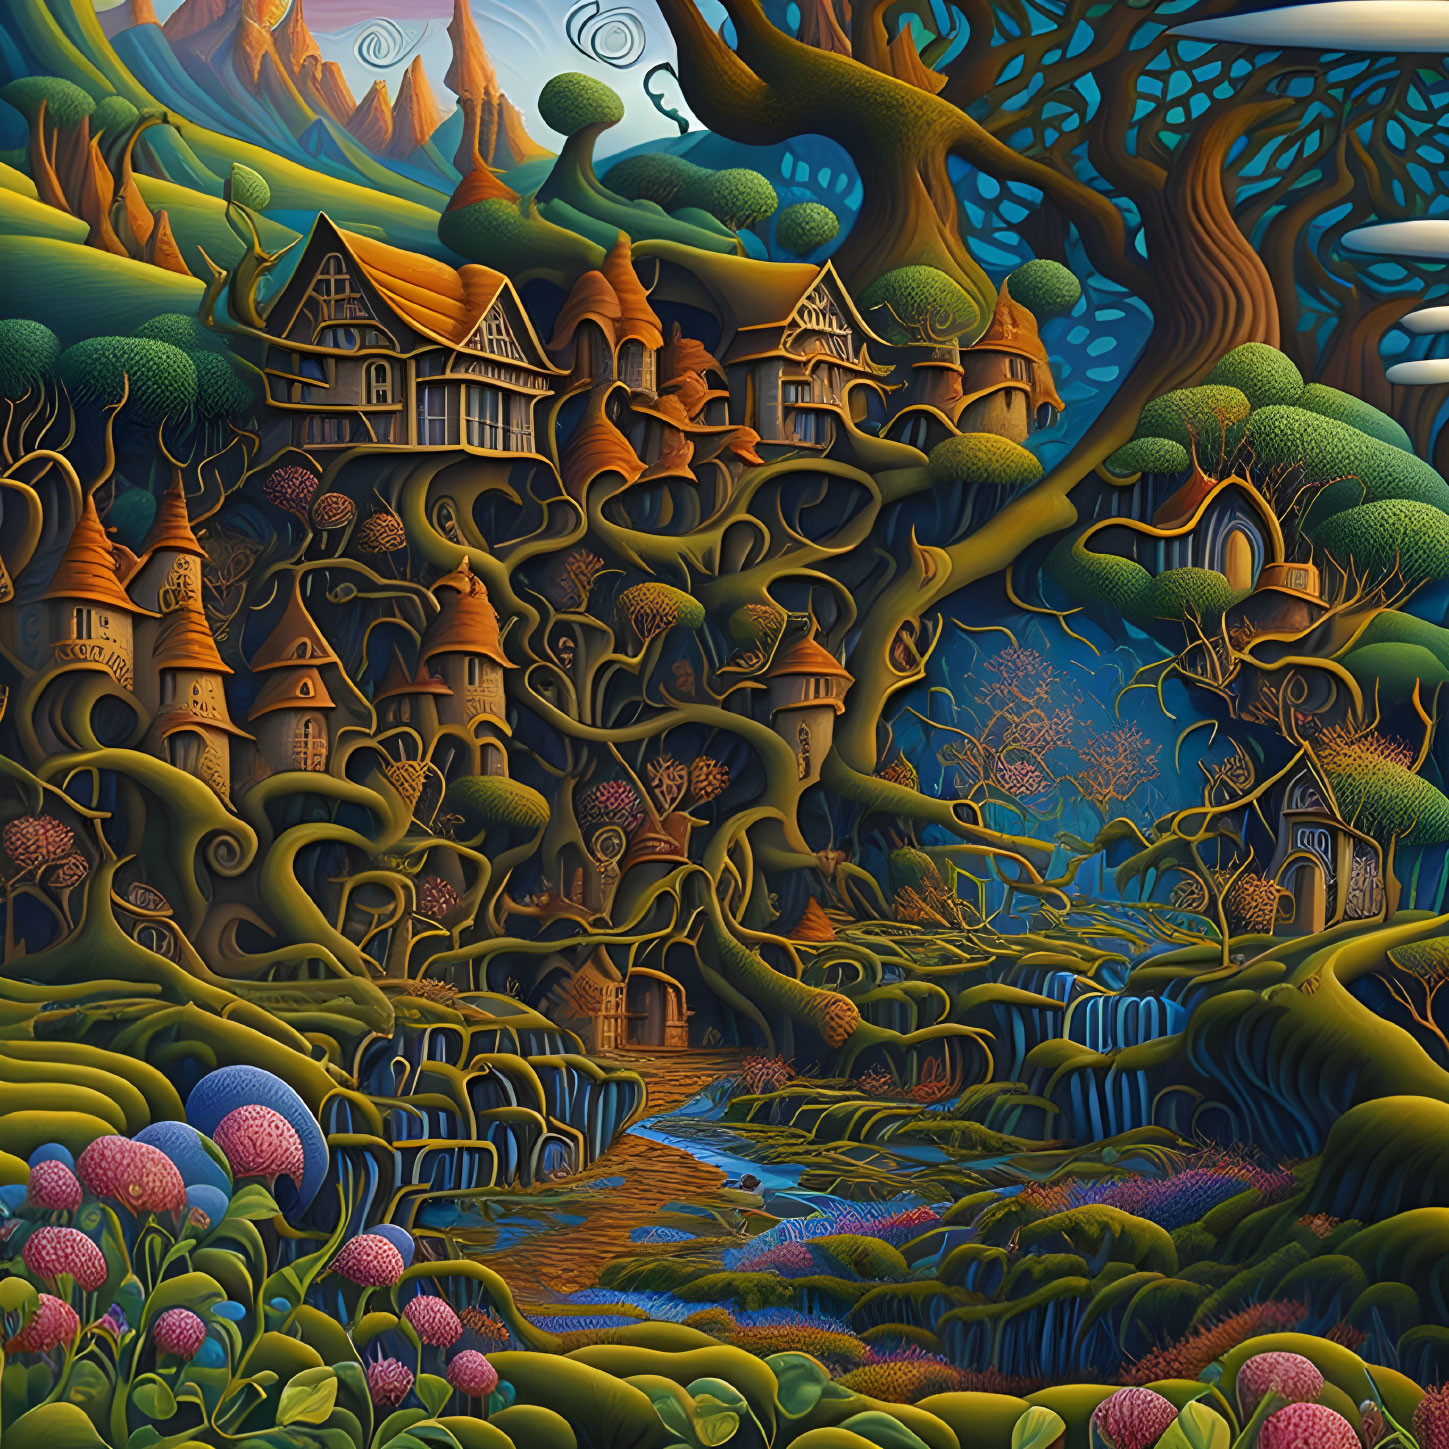 Fantastical landscape with whimsical trees and peculiar houses